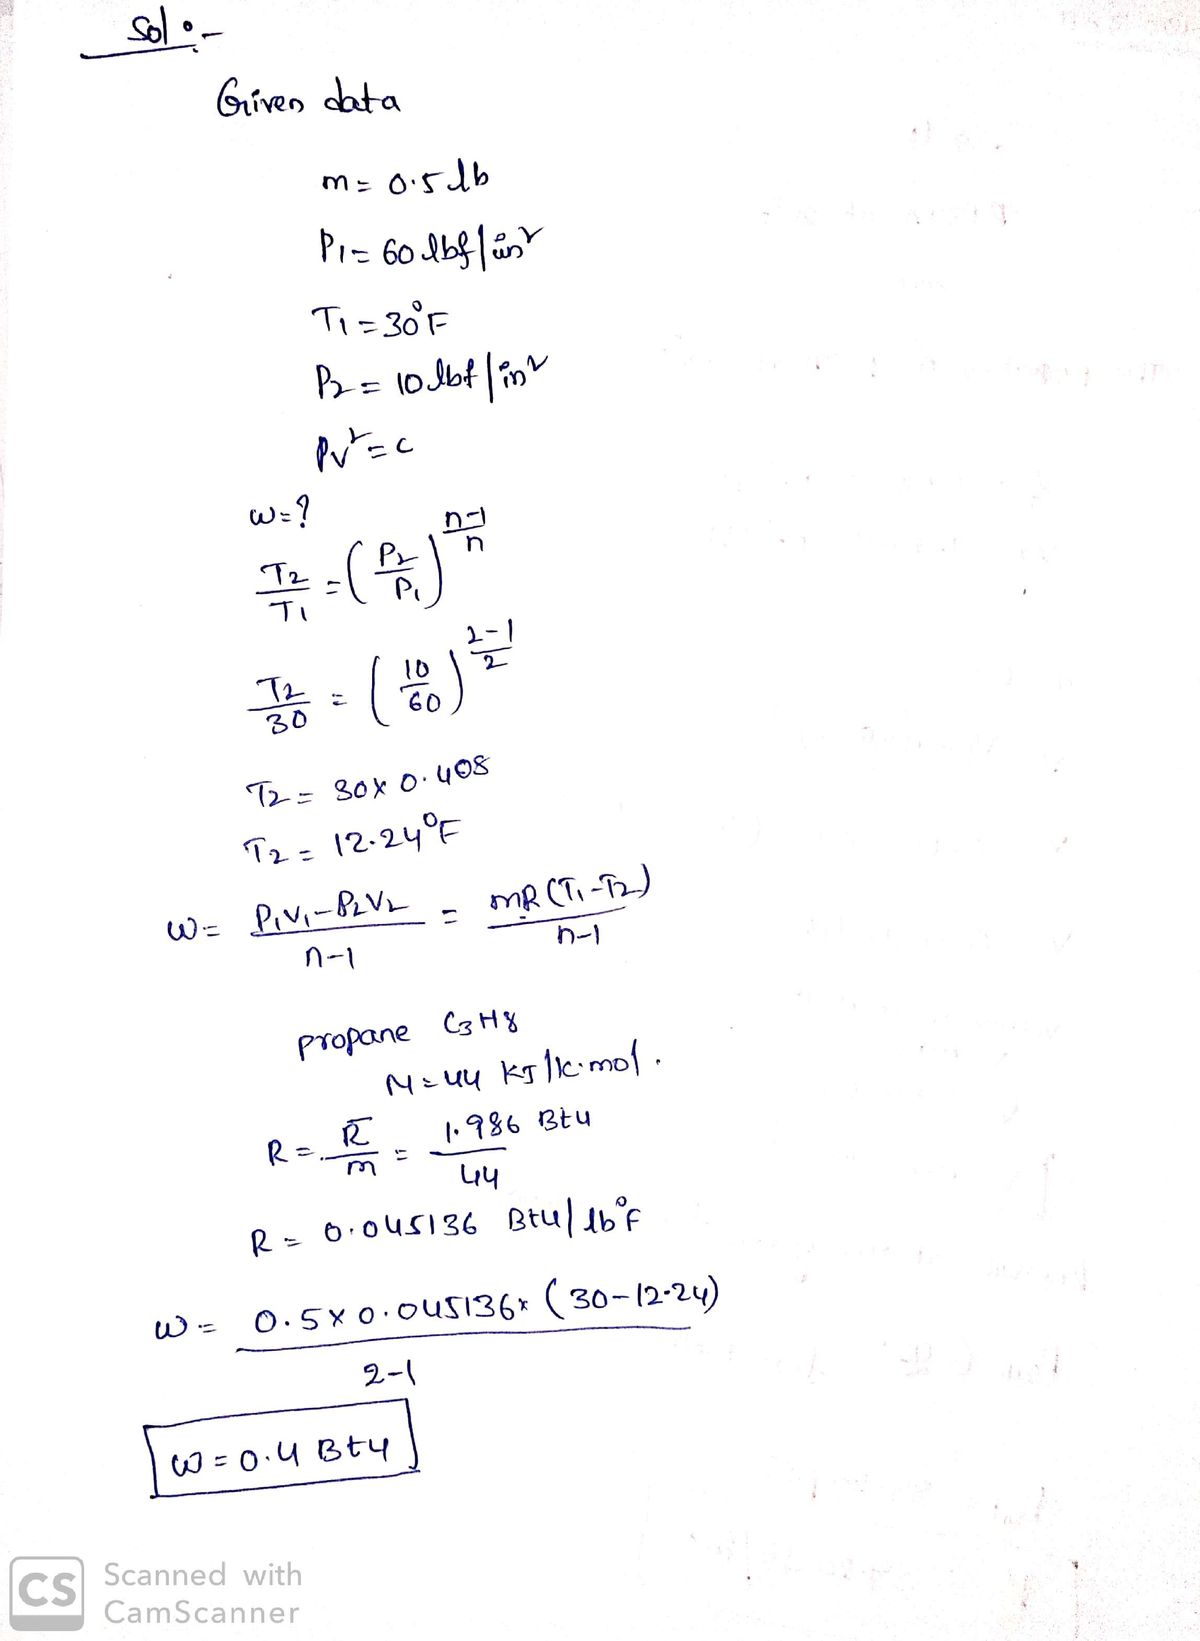 Mechanical Engineering homework question answer, step 1, image 1